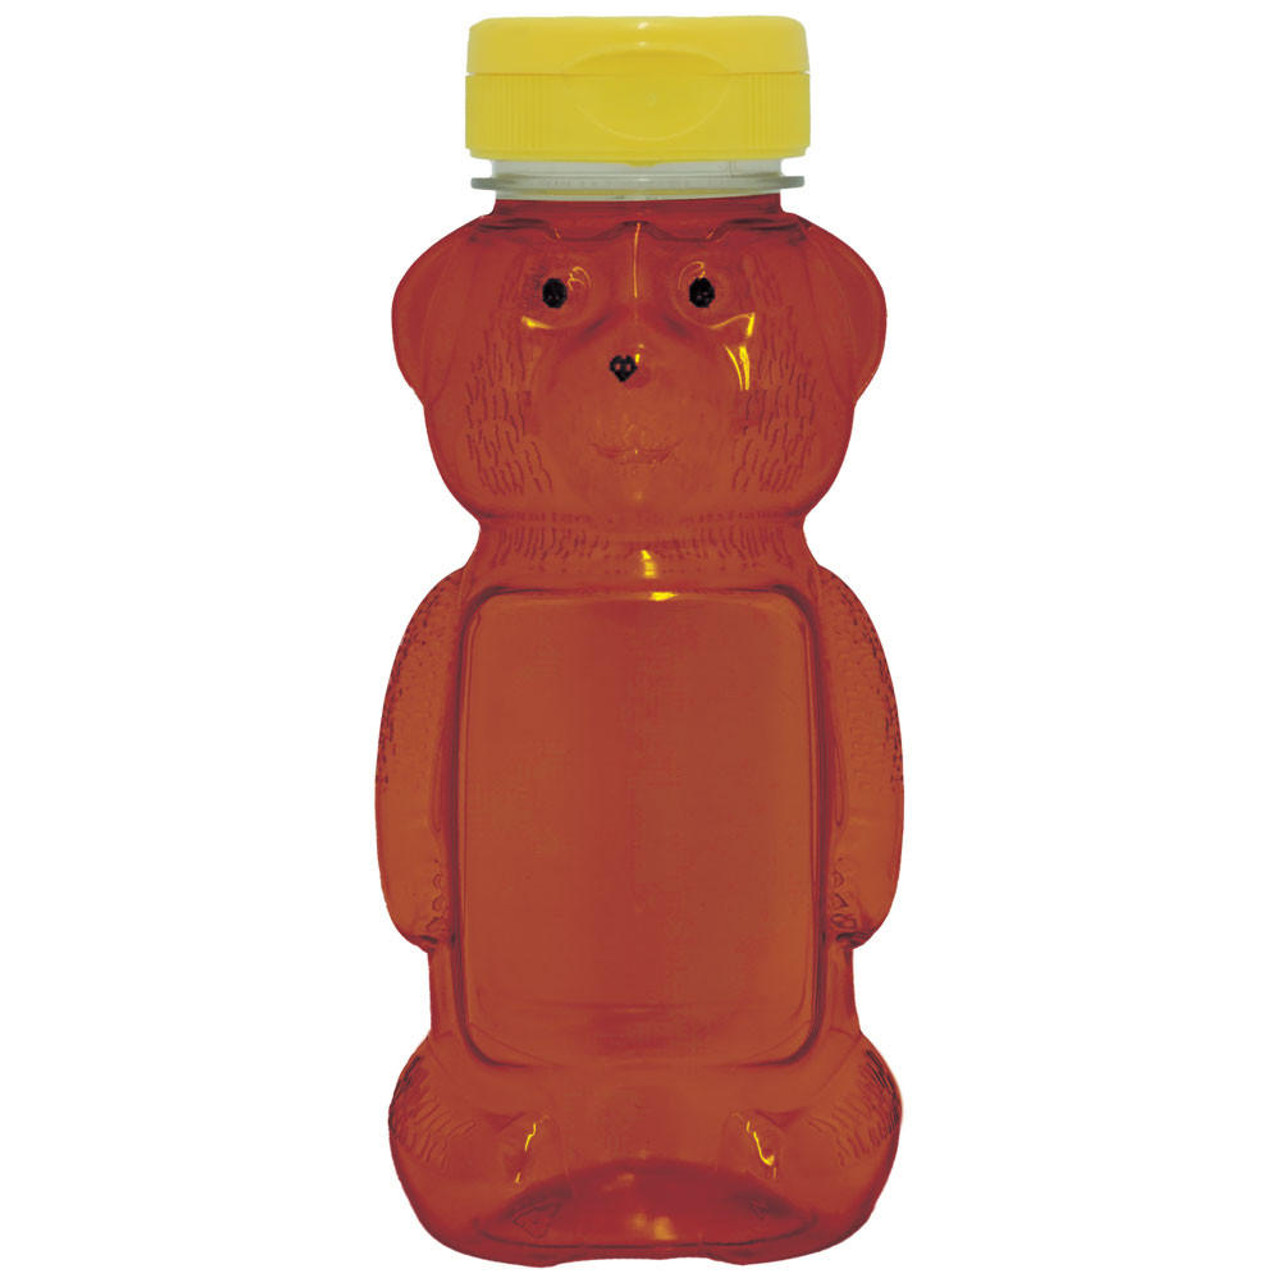 https://cdn11.bigcommerce.com/s-dhdy1goaa7/images/stencil/1280x1280/products/1171/5700/cn831-12-oz-plastic-bear-with-yellow-flip-top-lid__00574.1675883569.jpg?c=1